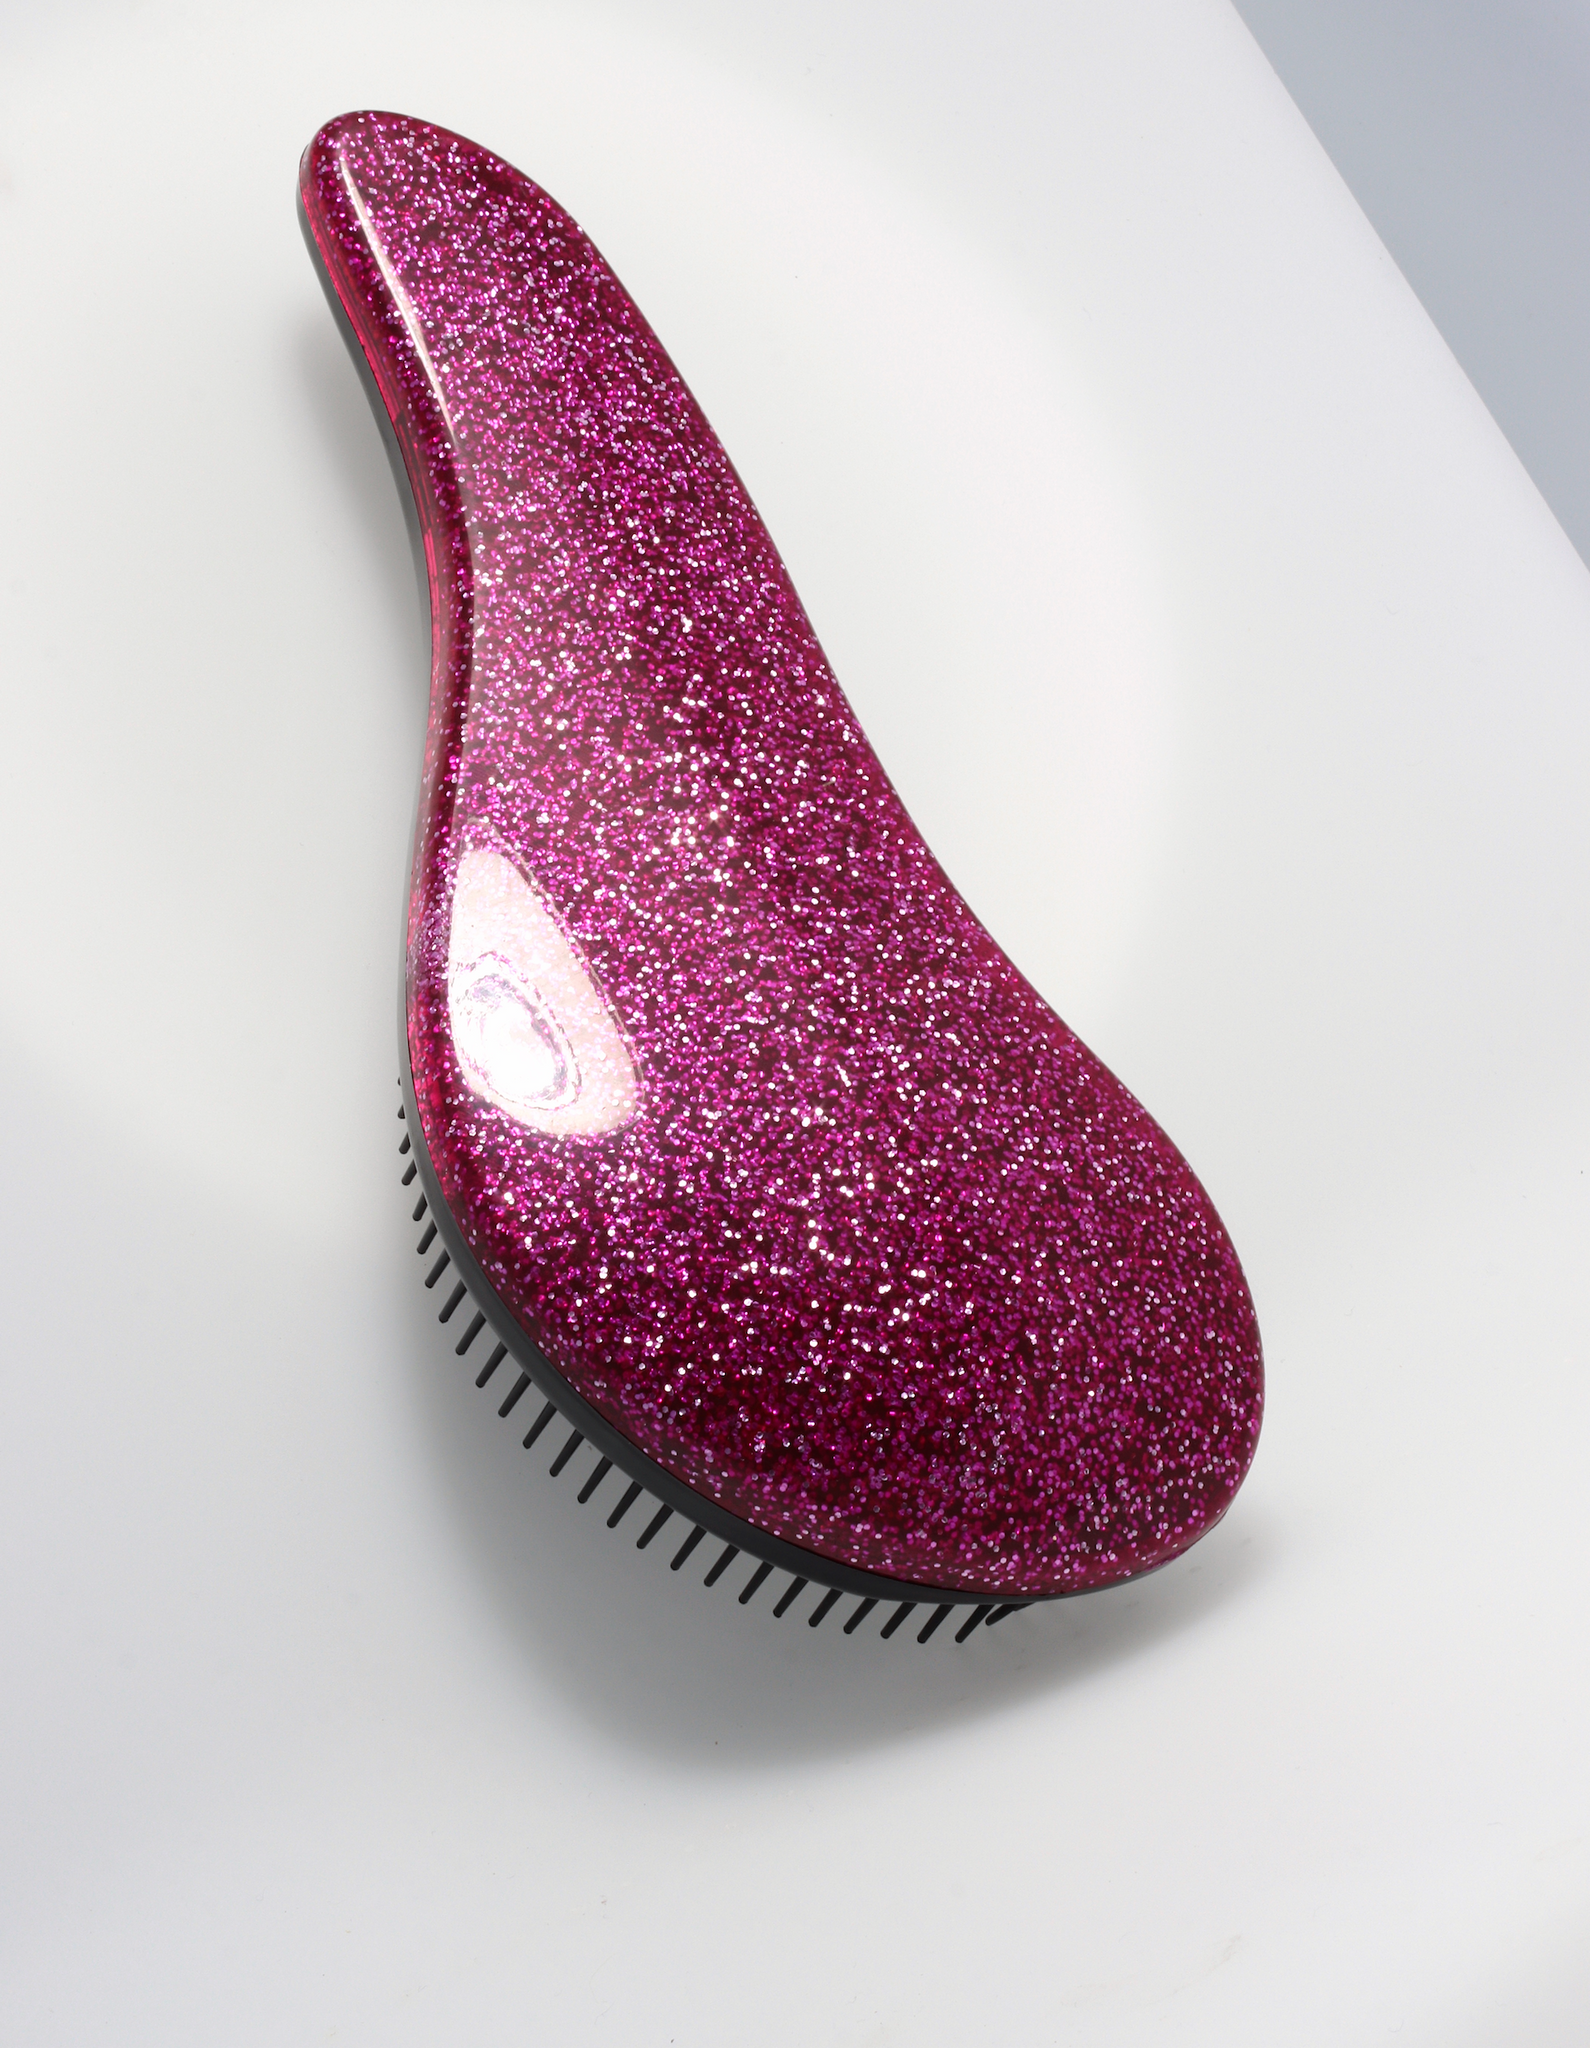 BRUSH FOR HAIR PURPLE WITH GLITTER